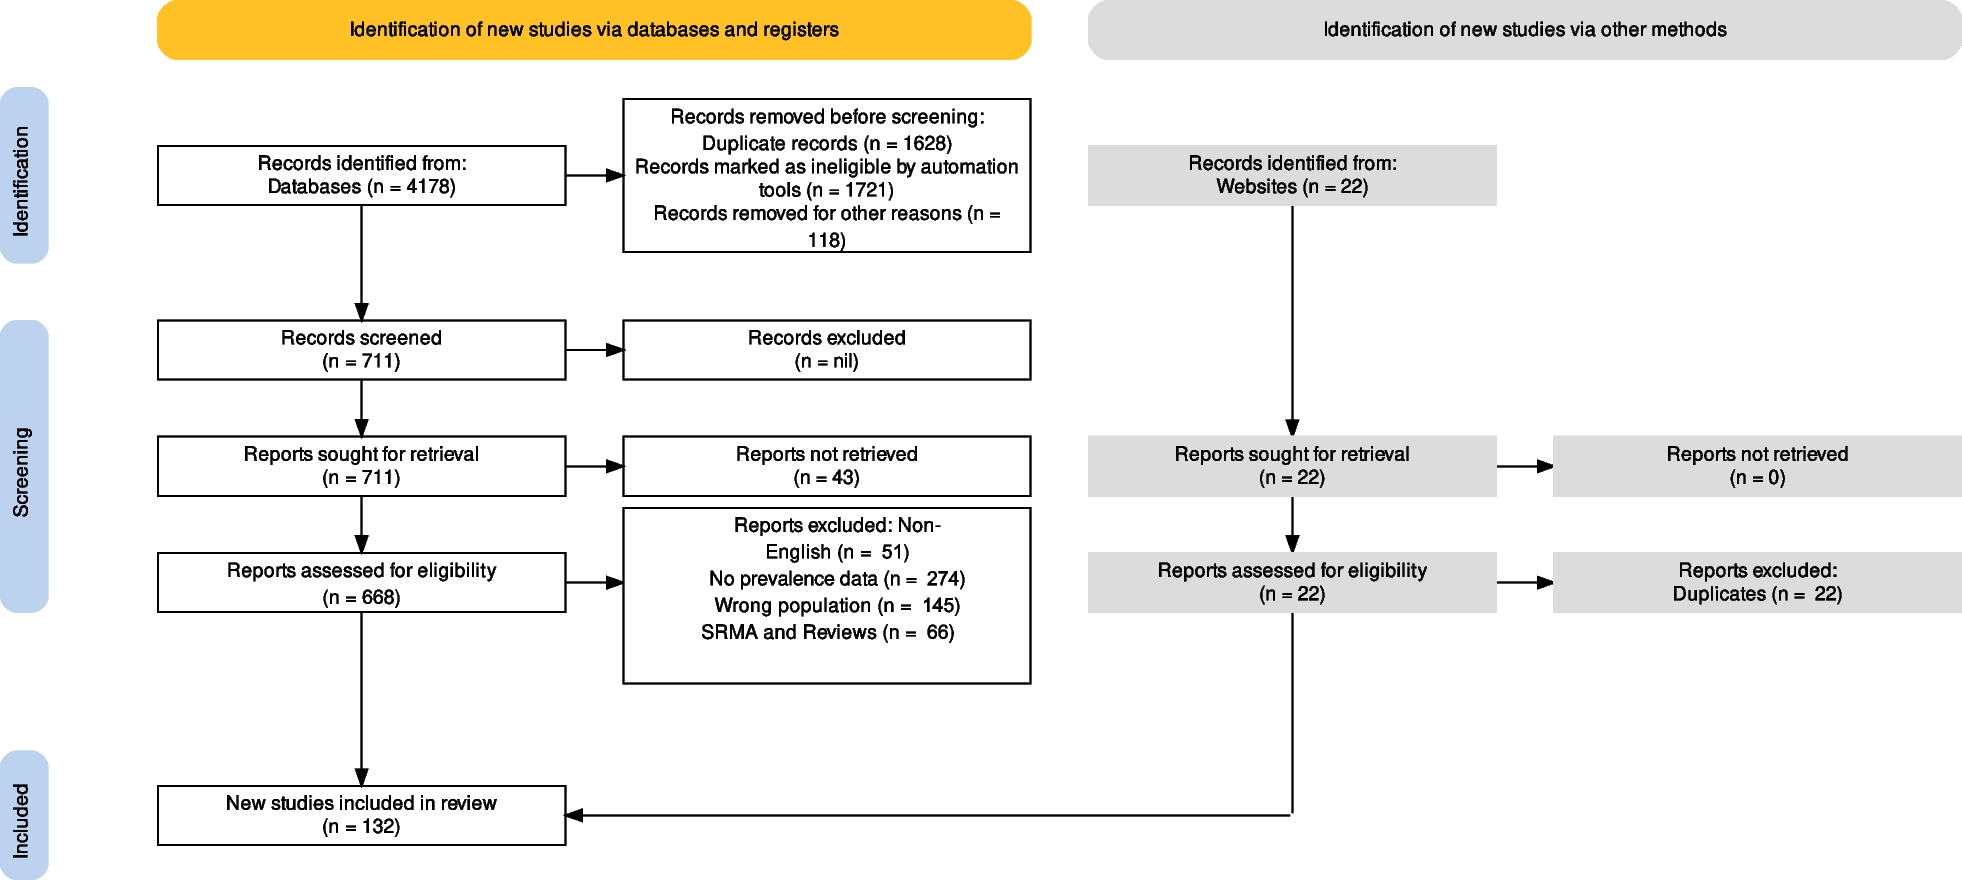 A systematic review, meta-analysis, and meta-regression of the prevalence of self-reported disordered eating and associated factors among athletes worldwide